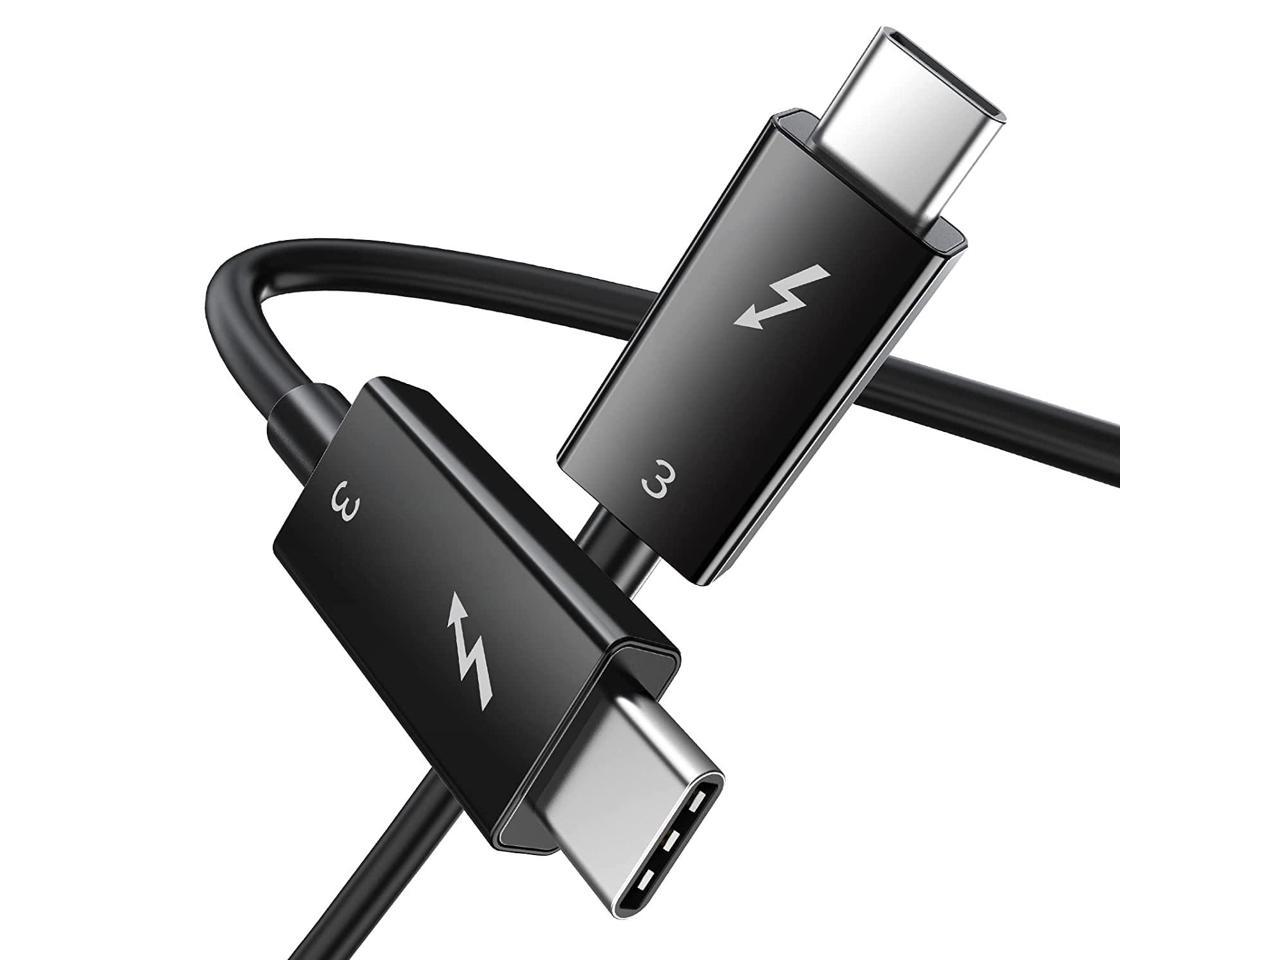 Alienware 17 and More,6.6ft 100W 20Gpbs Thunderbolt 3 Certified USB C Cable Compatible with New MacBook Pro 6.6ft Nekteck Thunderbolt 3 Cable ThinkPad Yoga 